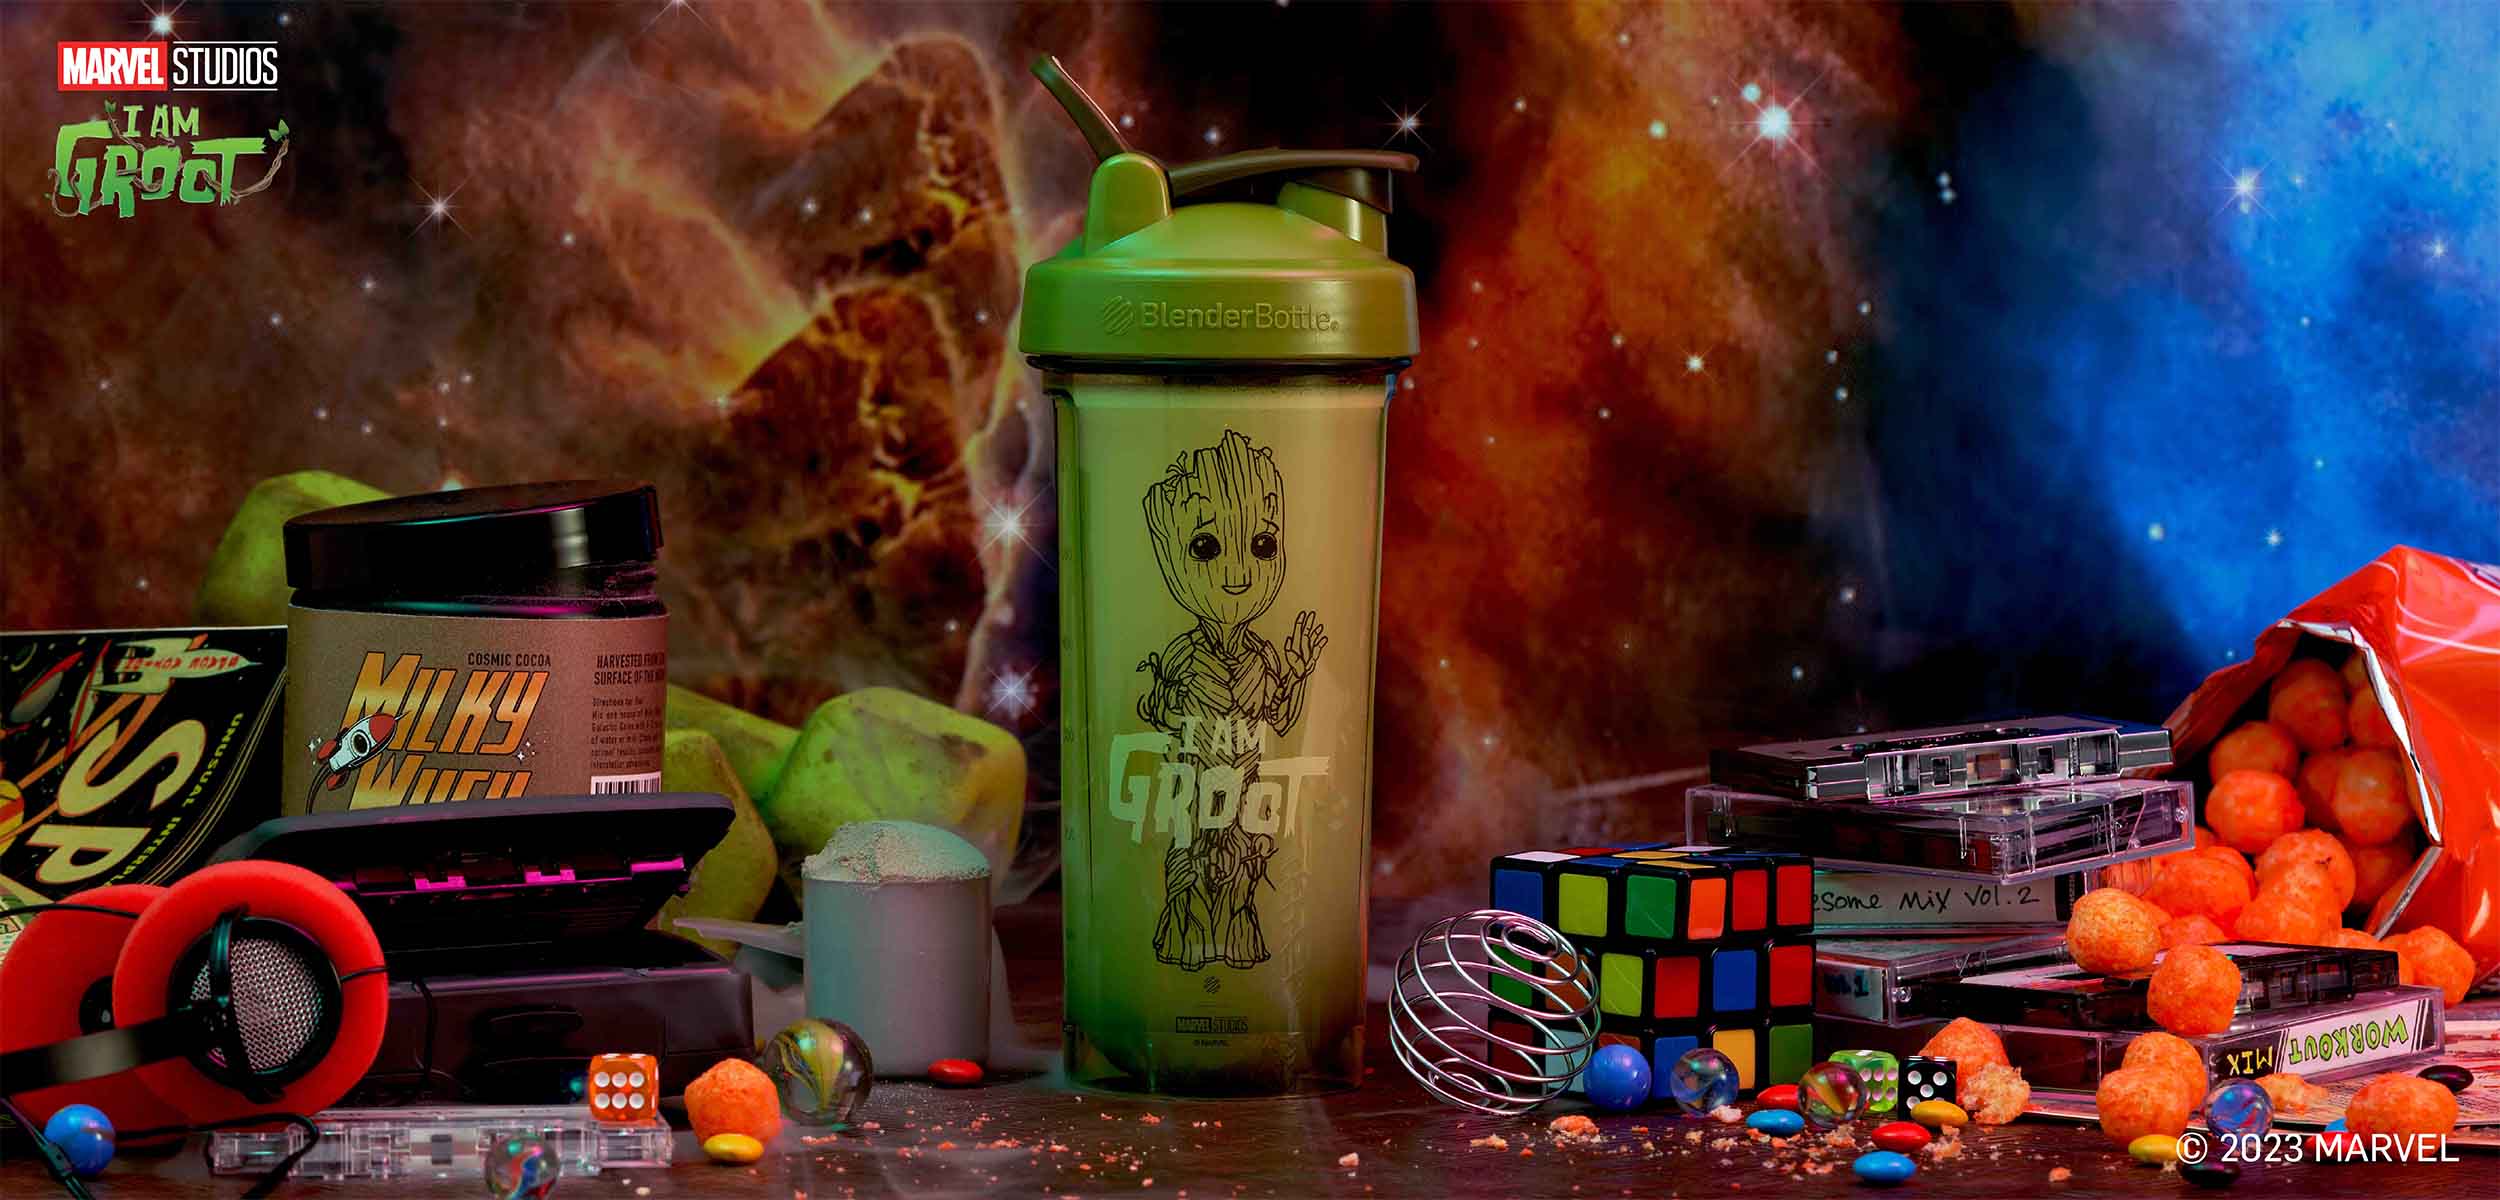 The Edge Sports Nutrition - Grab your Marvel Licenced Blender Bottle Pro28  Superhero Shaker today. Includes Captain Marvel, Thor, Spider-Man, Captain  America, Iron Man & Hulk. In store only while stocks last!